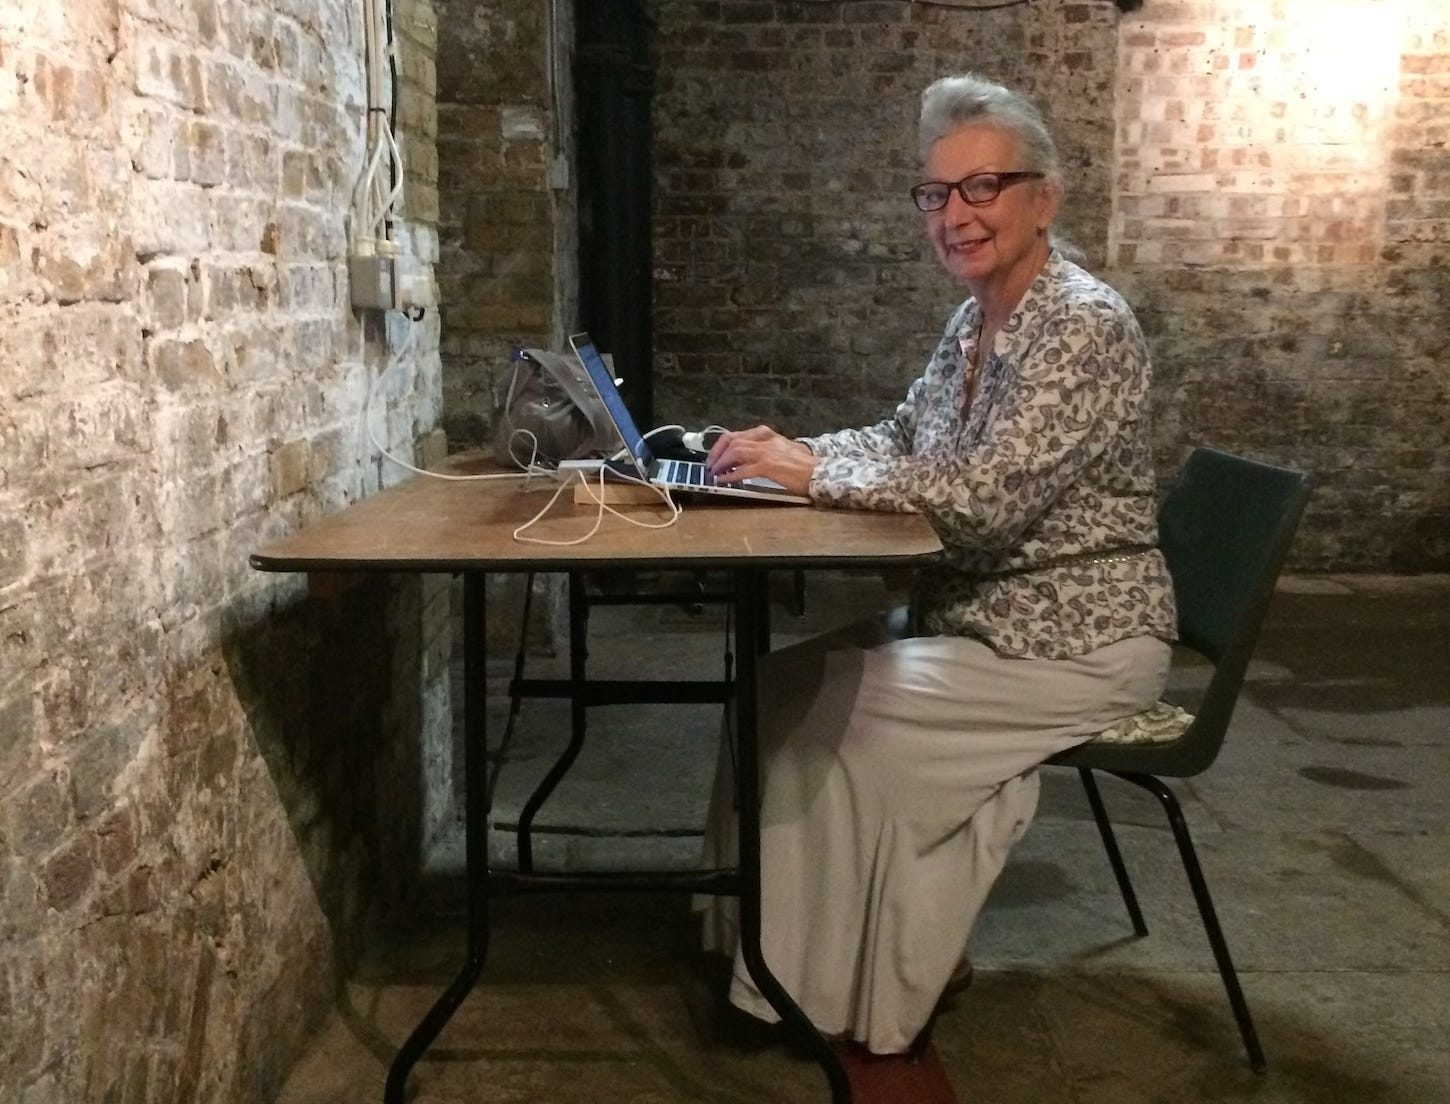 Middle aged lady wearing glasses, a blouse and a long skirt, in the crypt of a church sitting at a desk looking into the camera while typing on a laptop with old grey brown brick walls surrounding her and a flagstone floor.